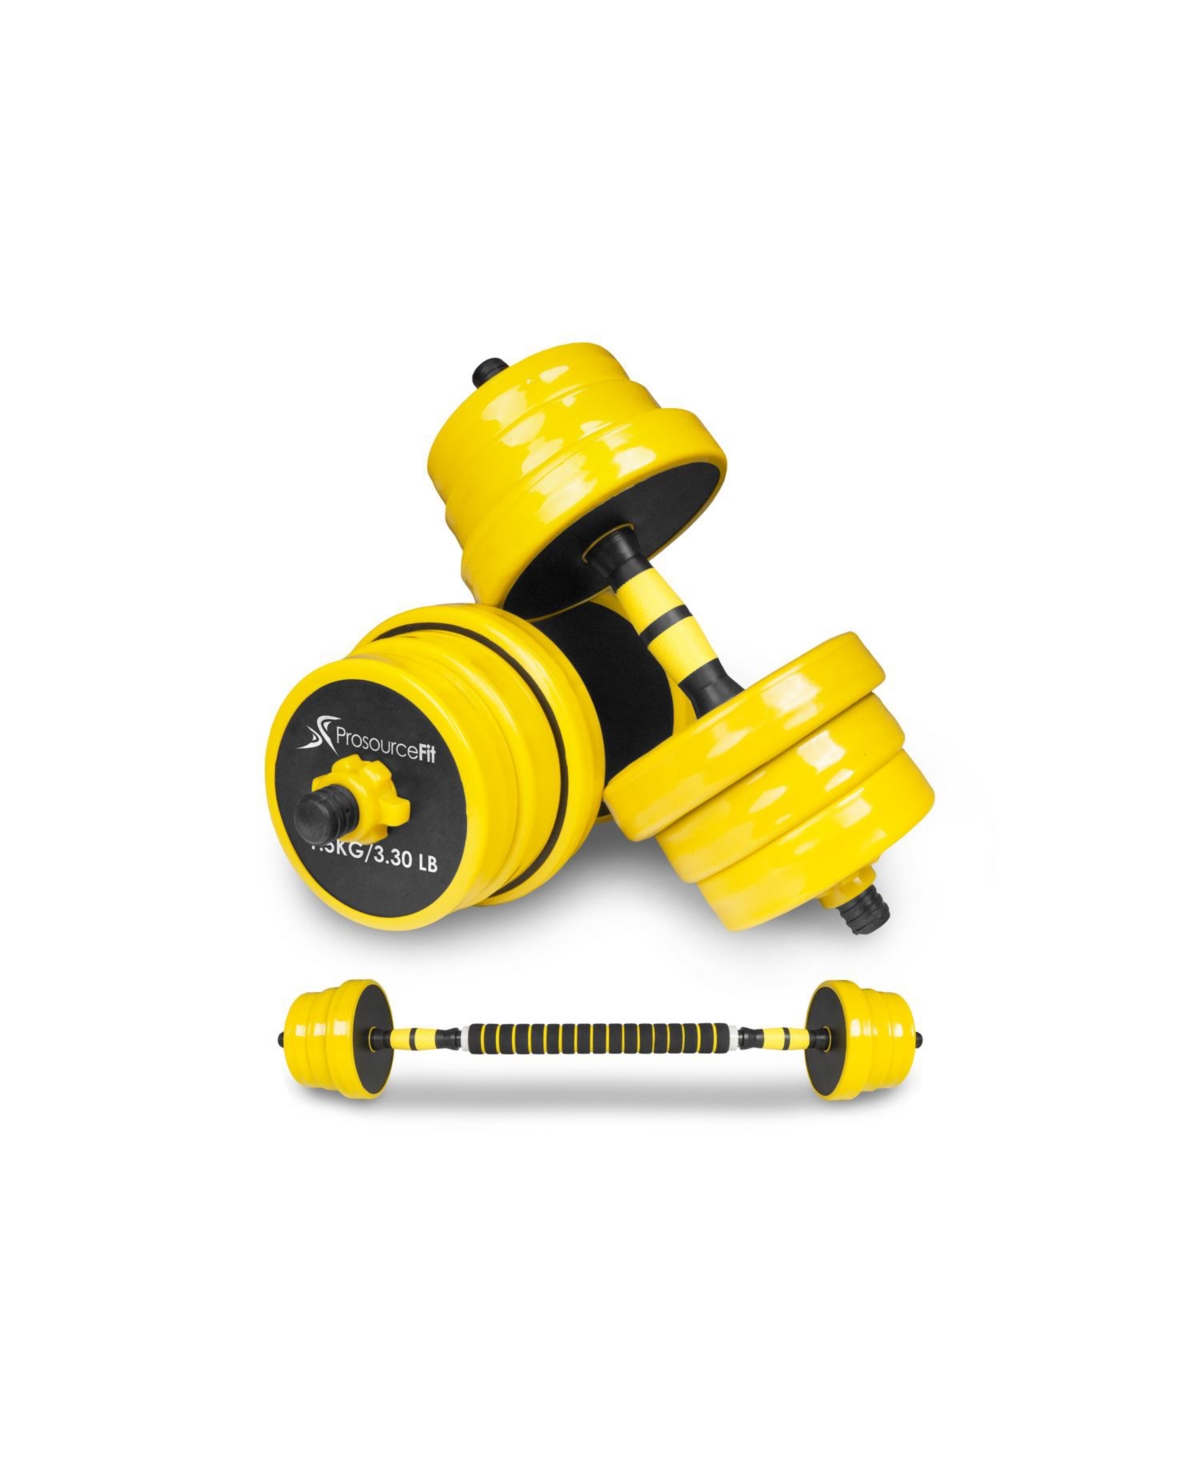 Adjustable Dumbbells and Barbell Set, 55lb - Black/yellow